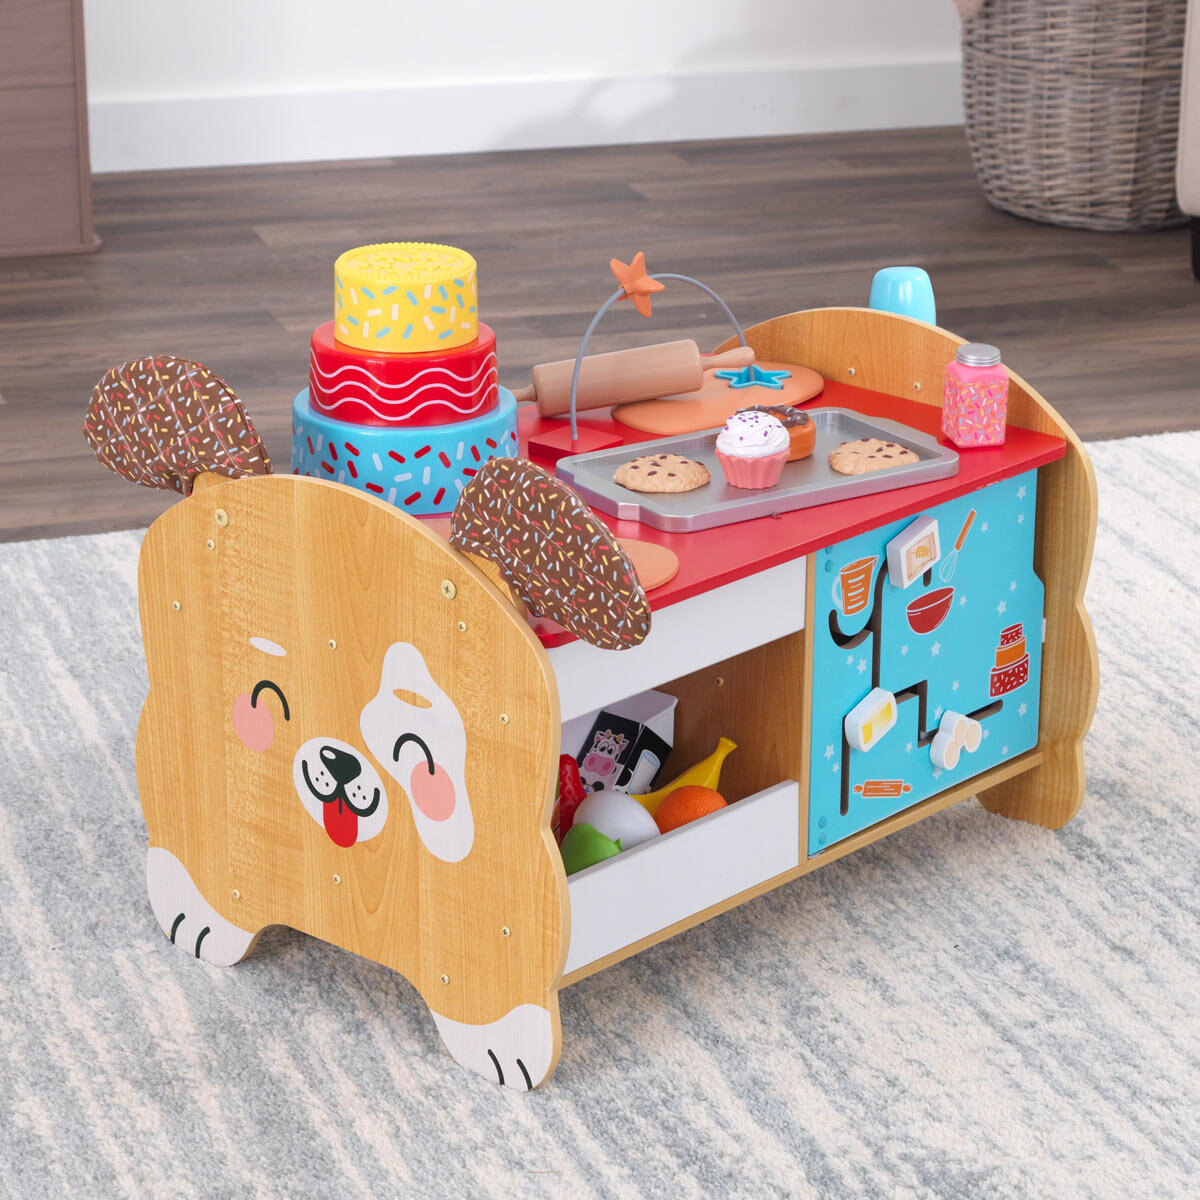 Buy KidKraft Foody Friends Deluxe Activity Center Overview1 Image at Costco.co.uk